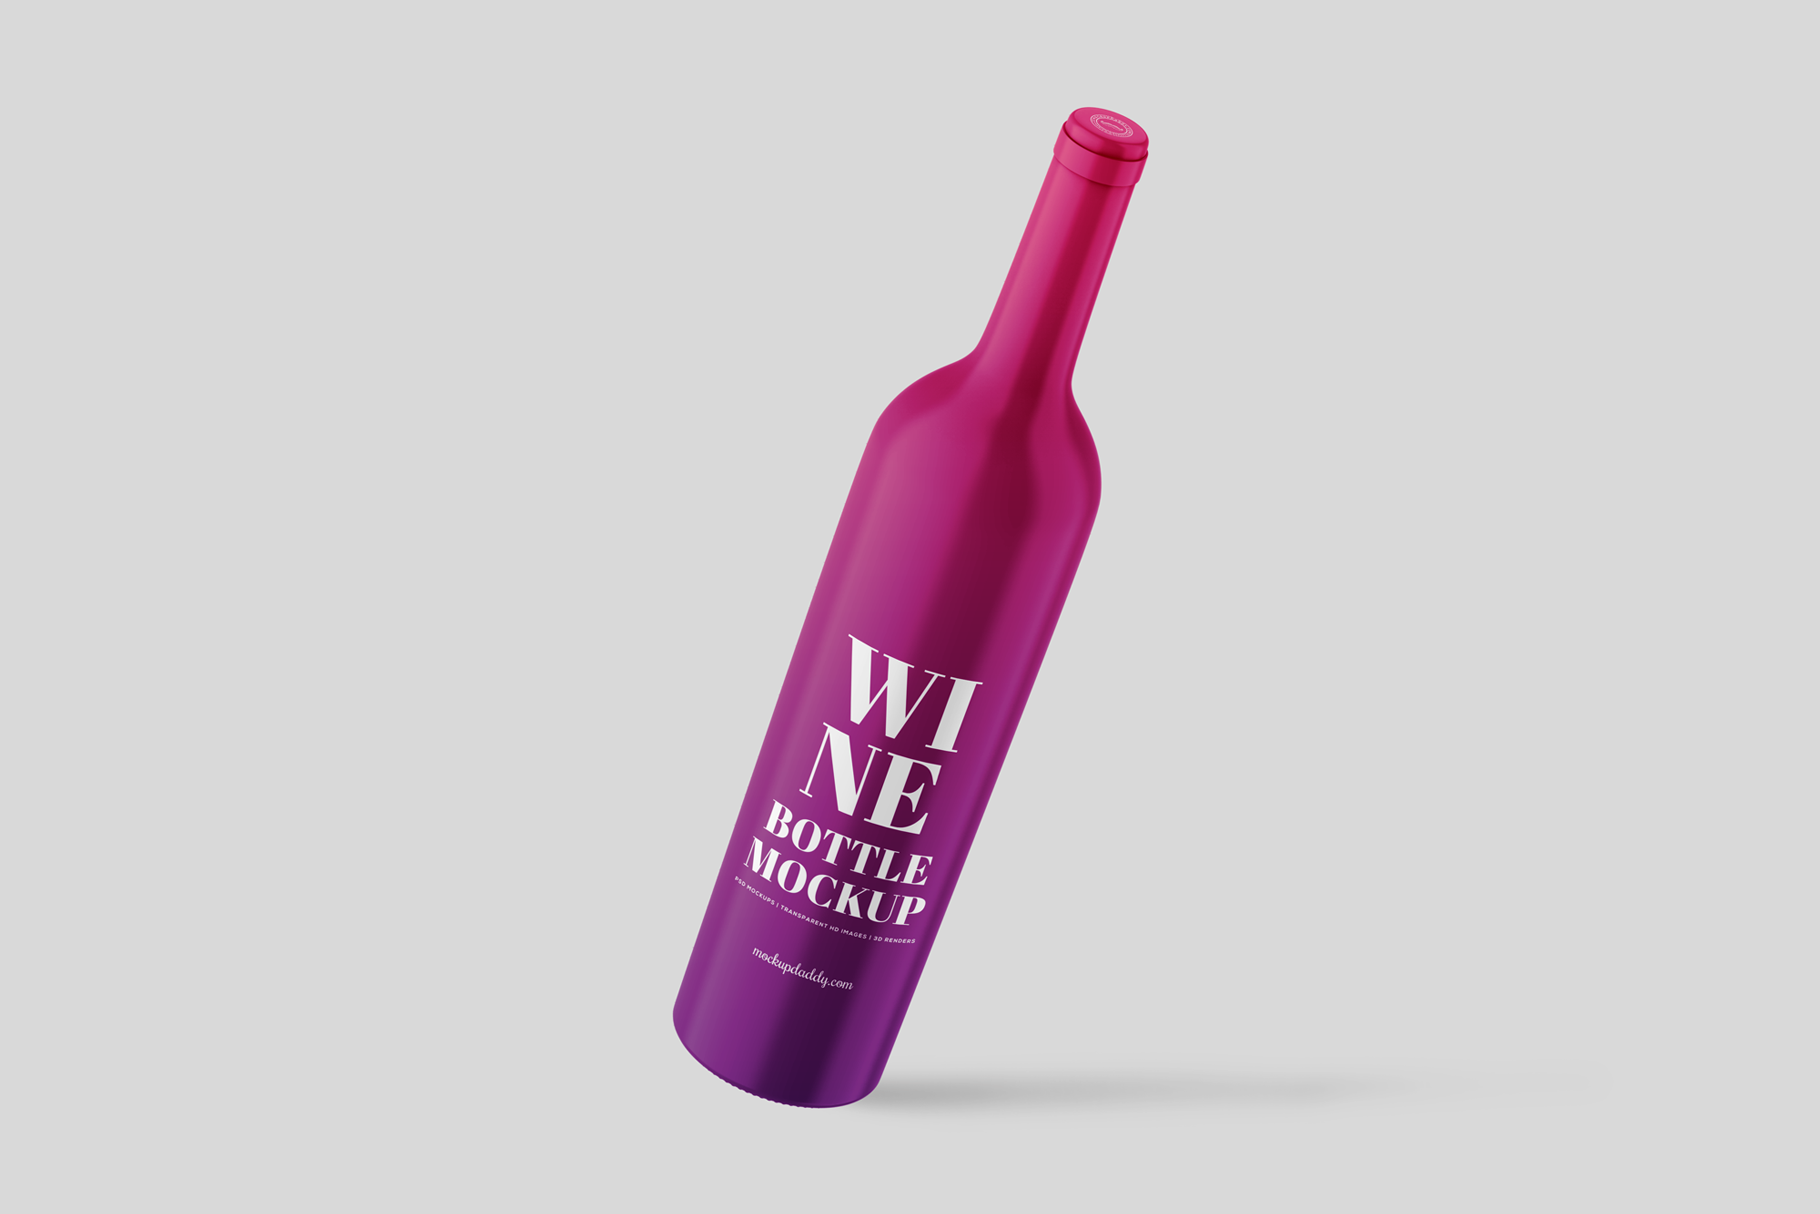 Wine Clay Bottle Mockup in pink and purple color with white text.